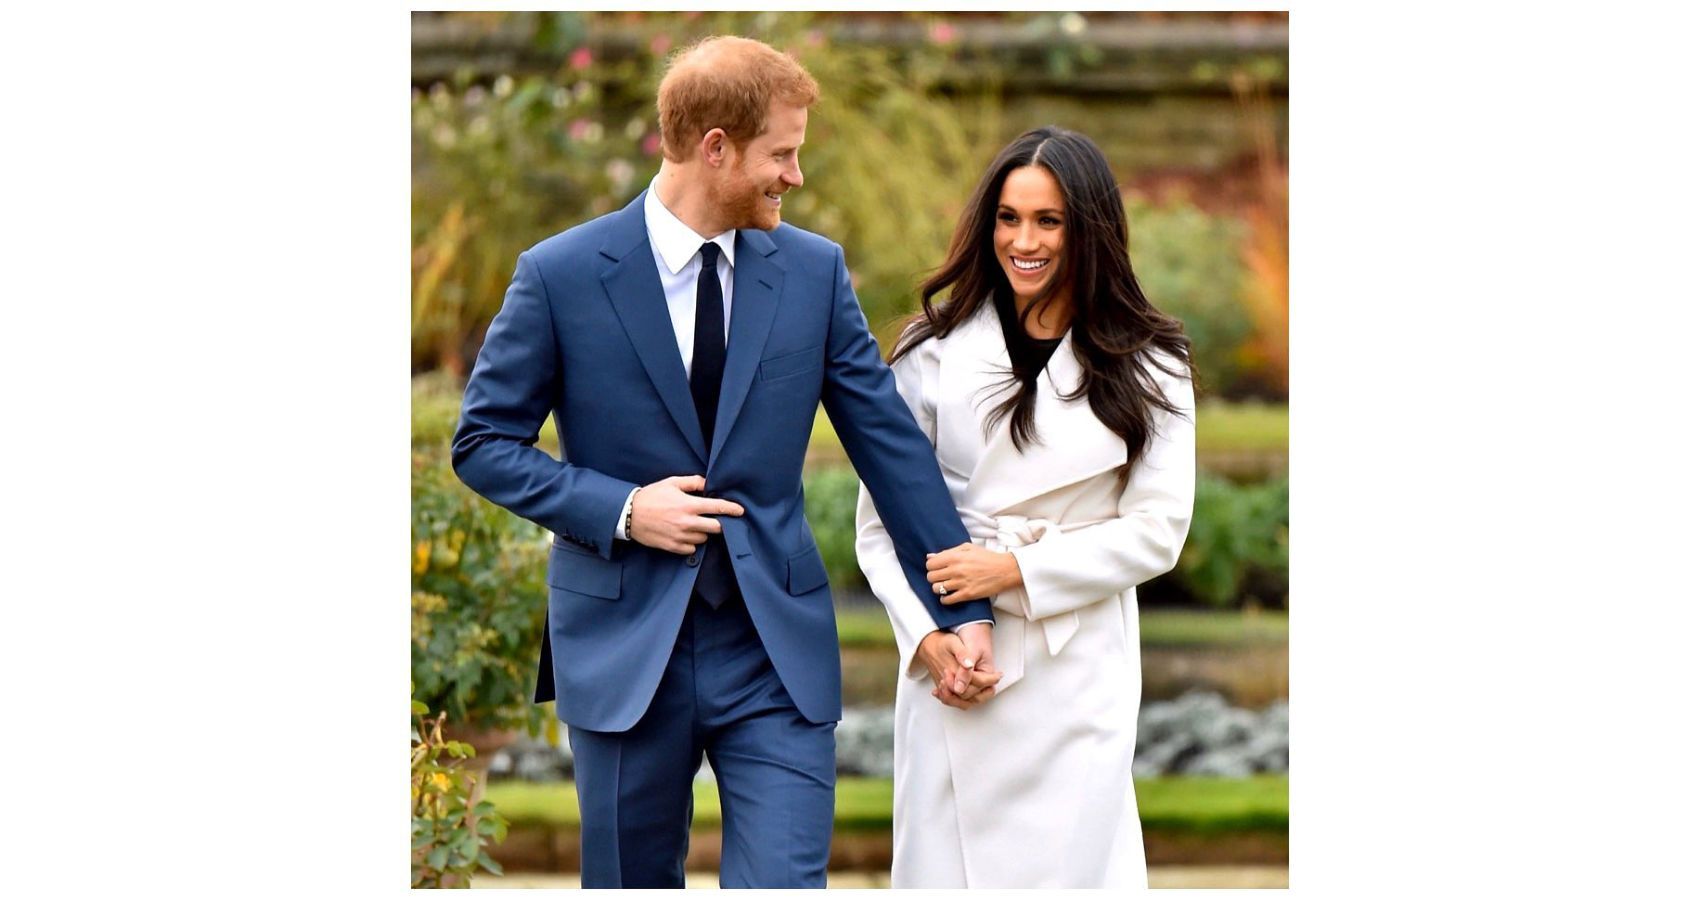 Prince Harry and Meghan Markle engagement photo